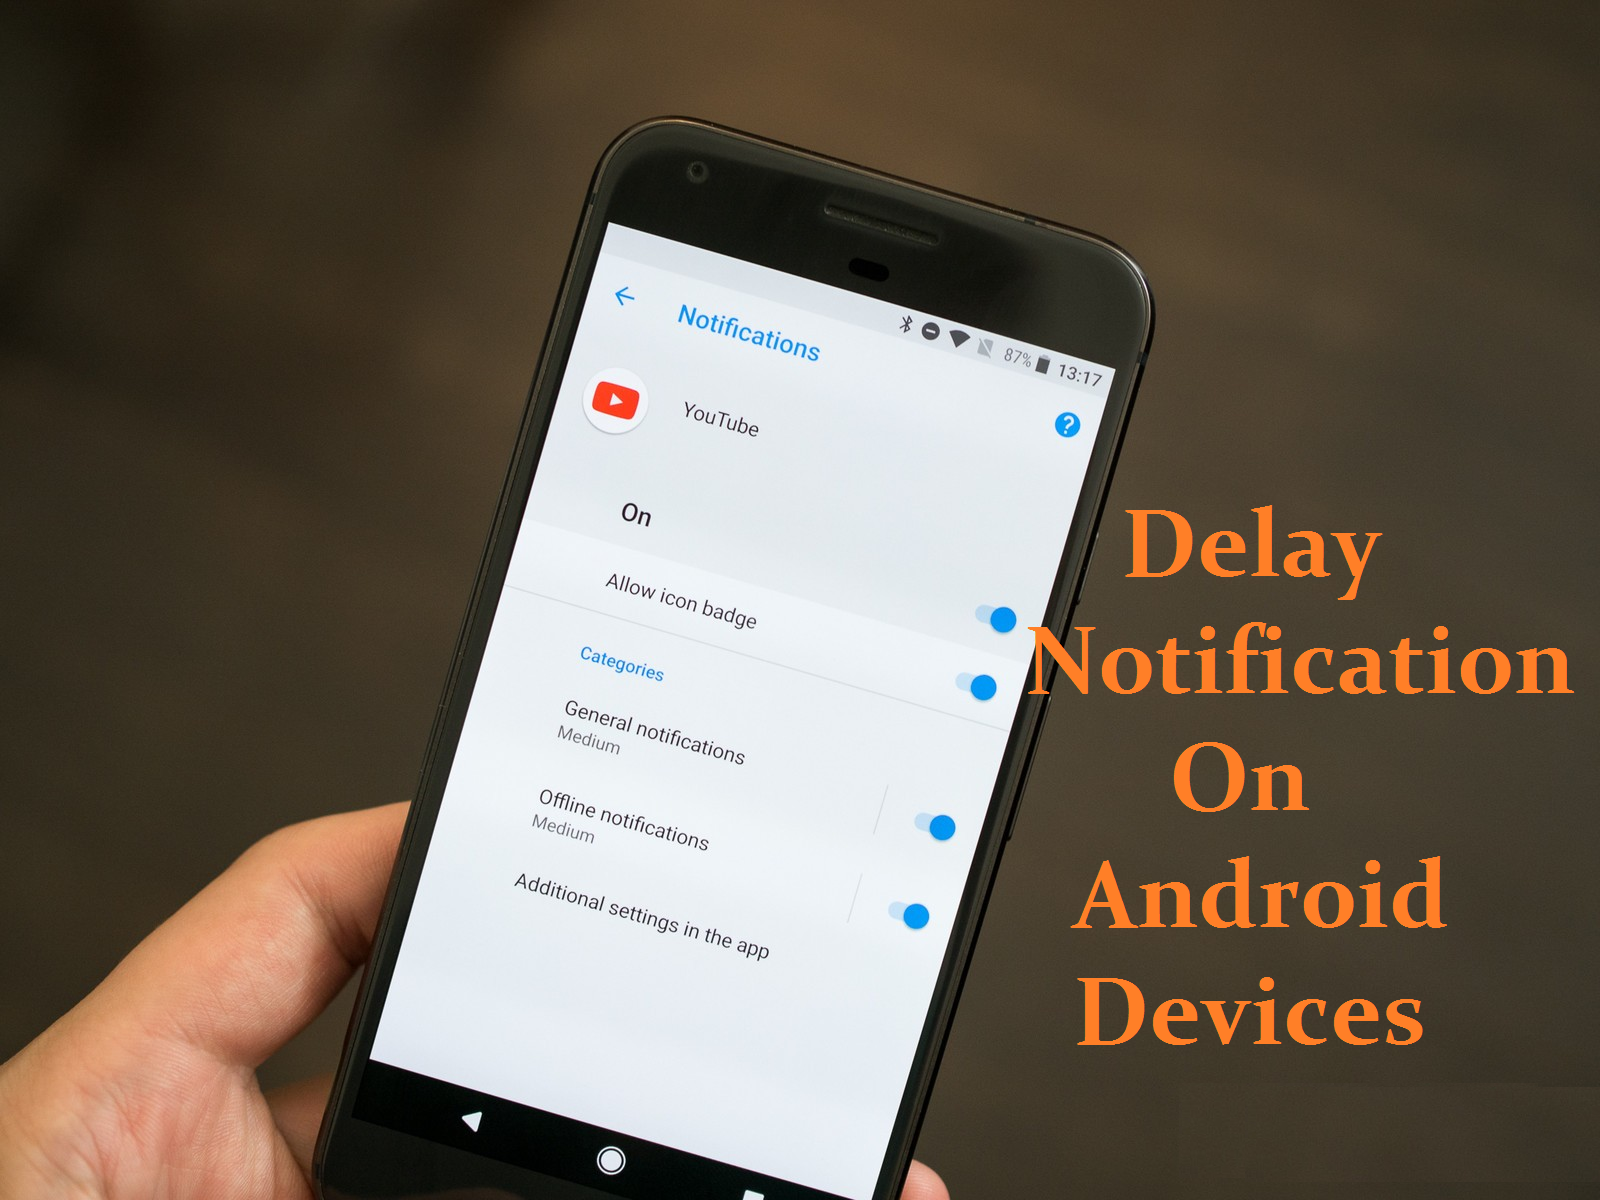 Fix The Delay Notification On Android Devices